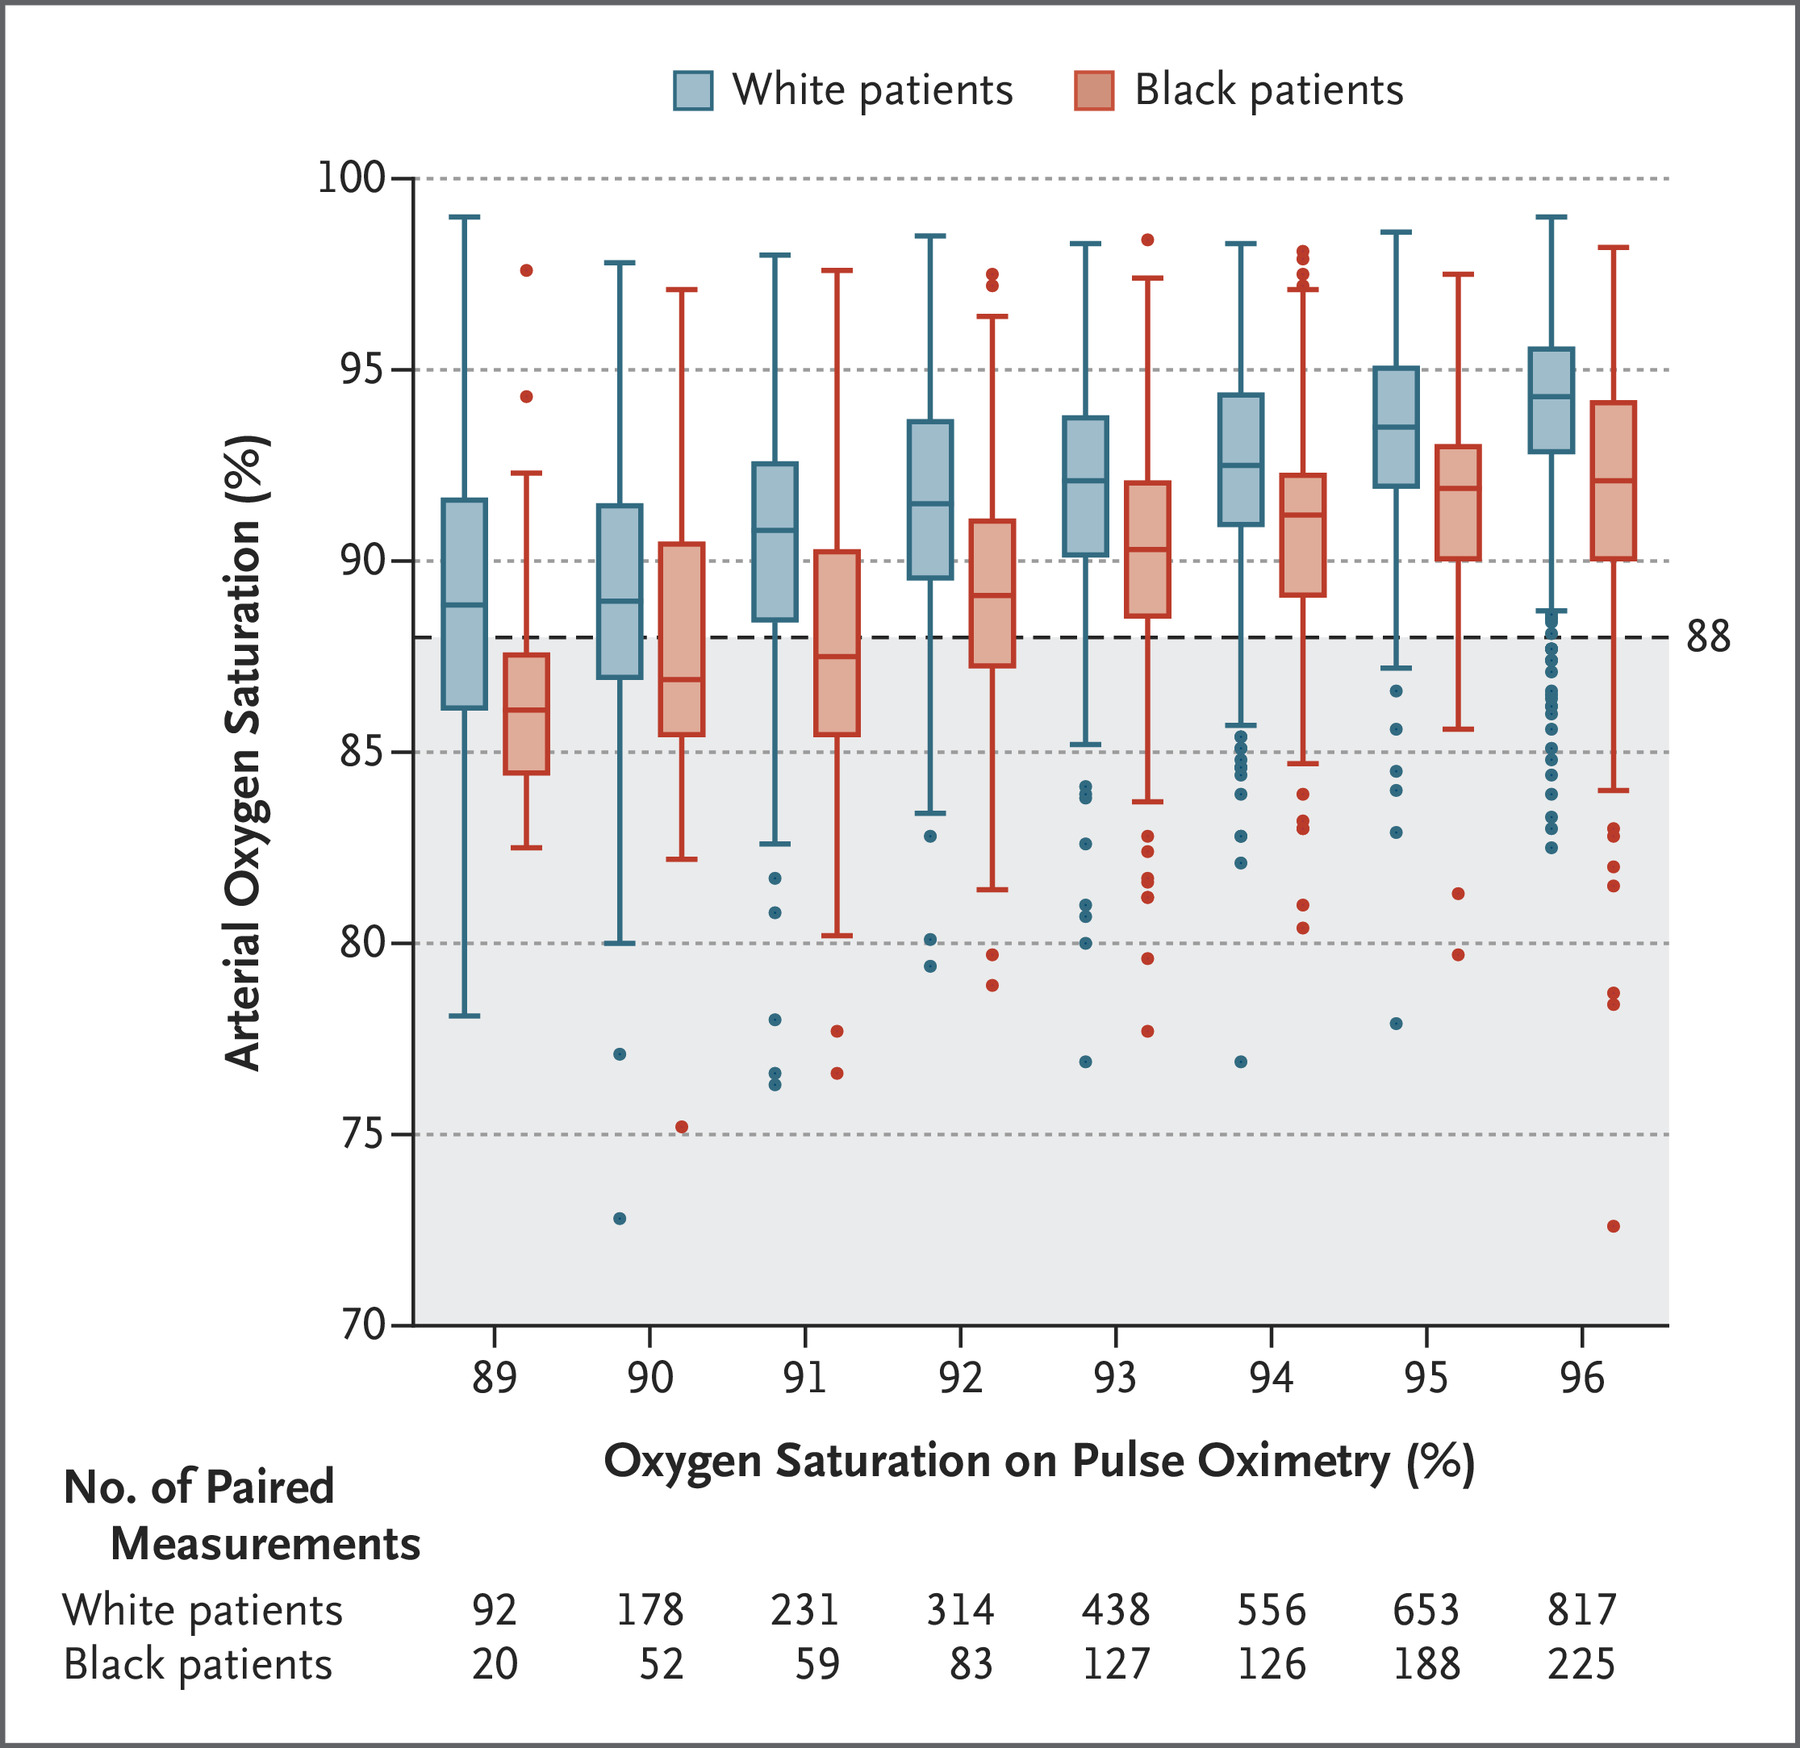 A boxplot comparing the blood oxygen levels of black and white patients.